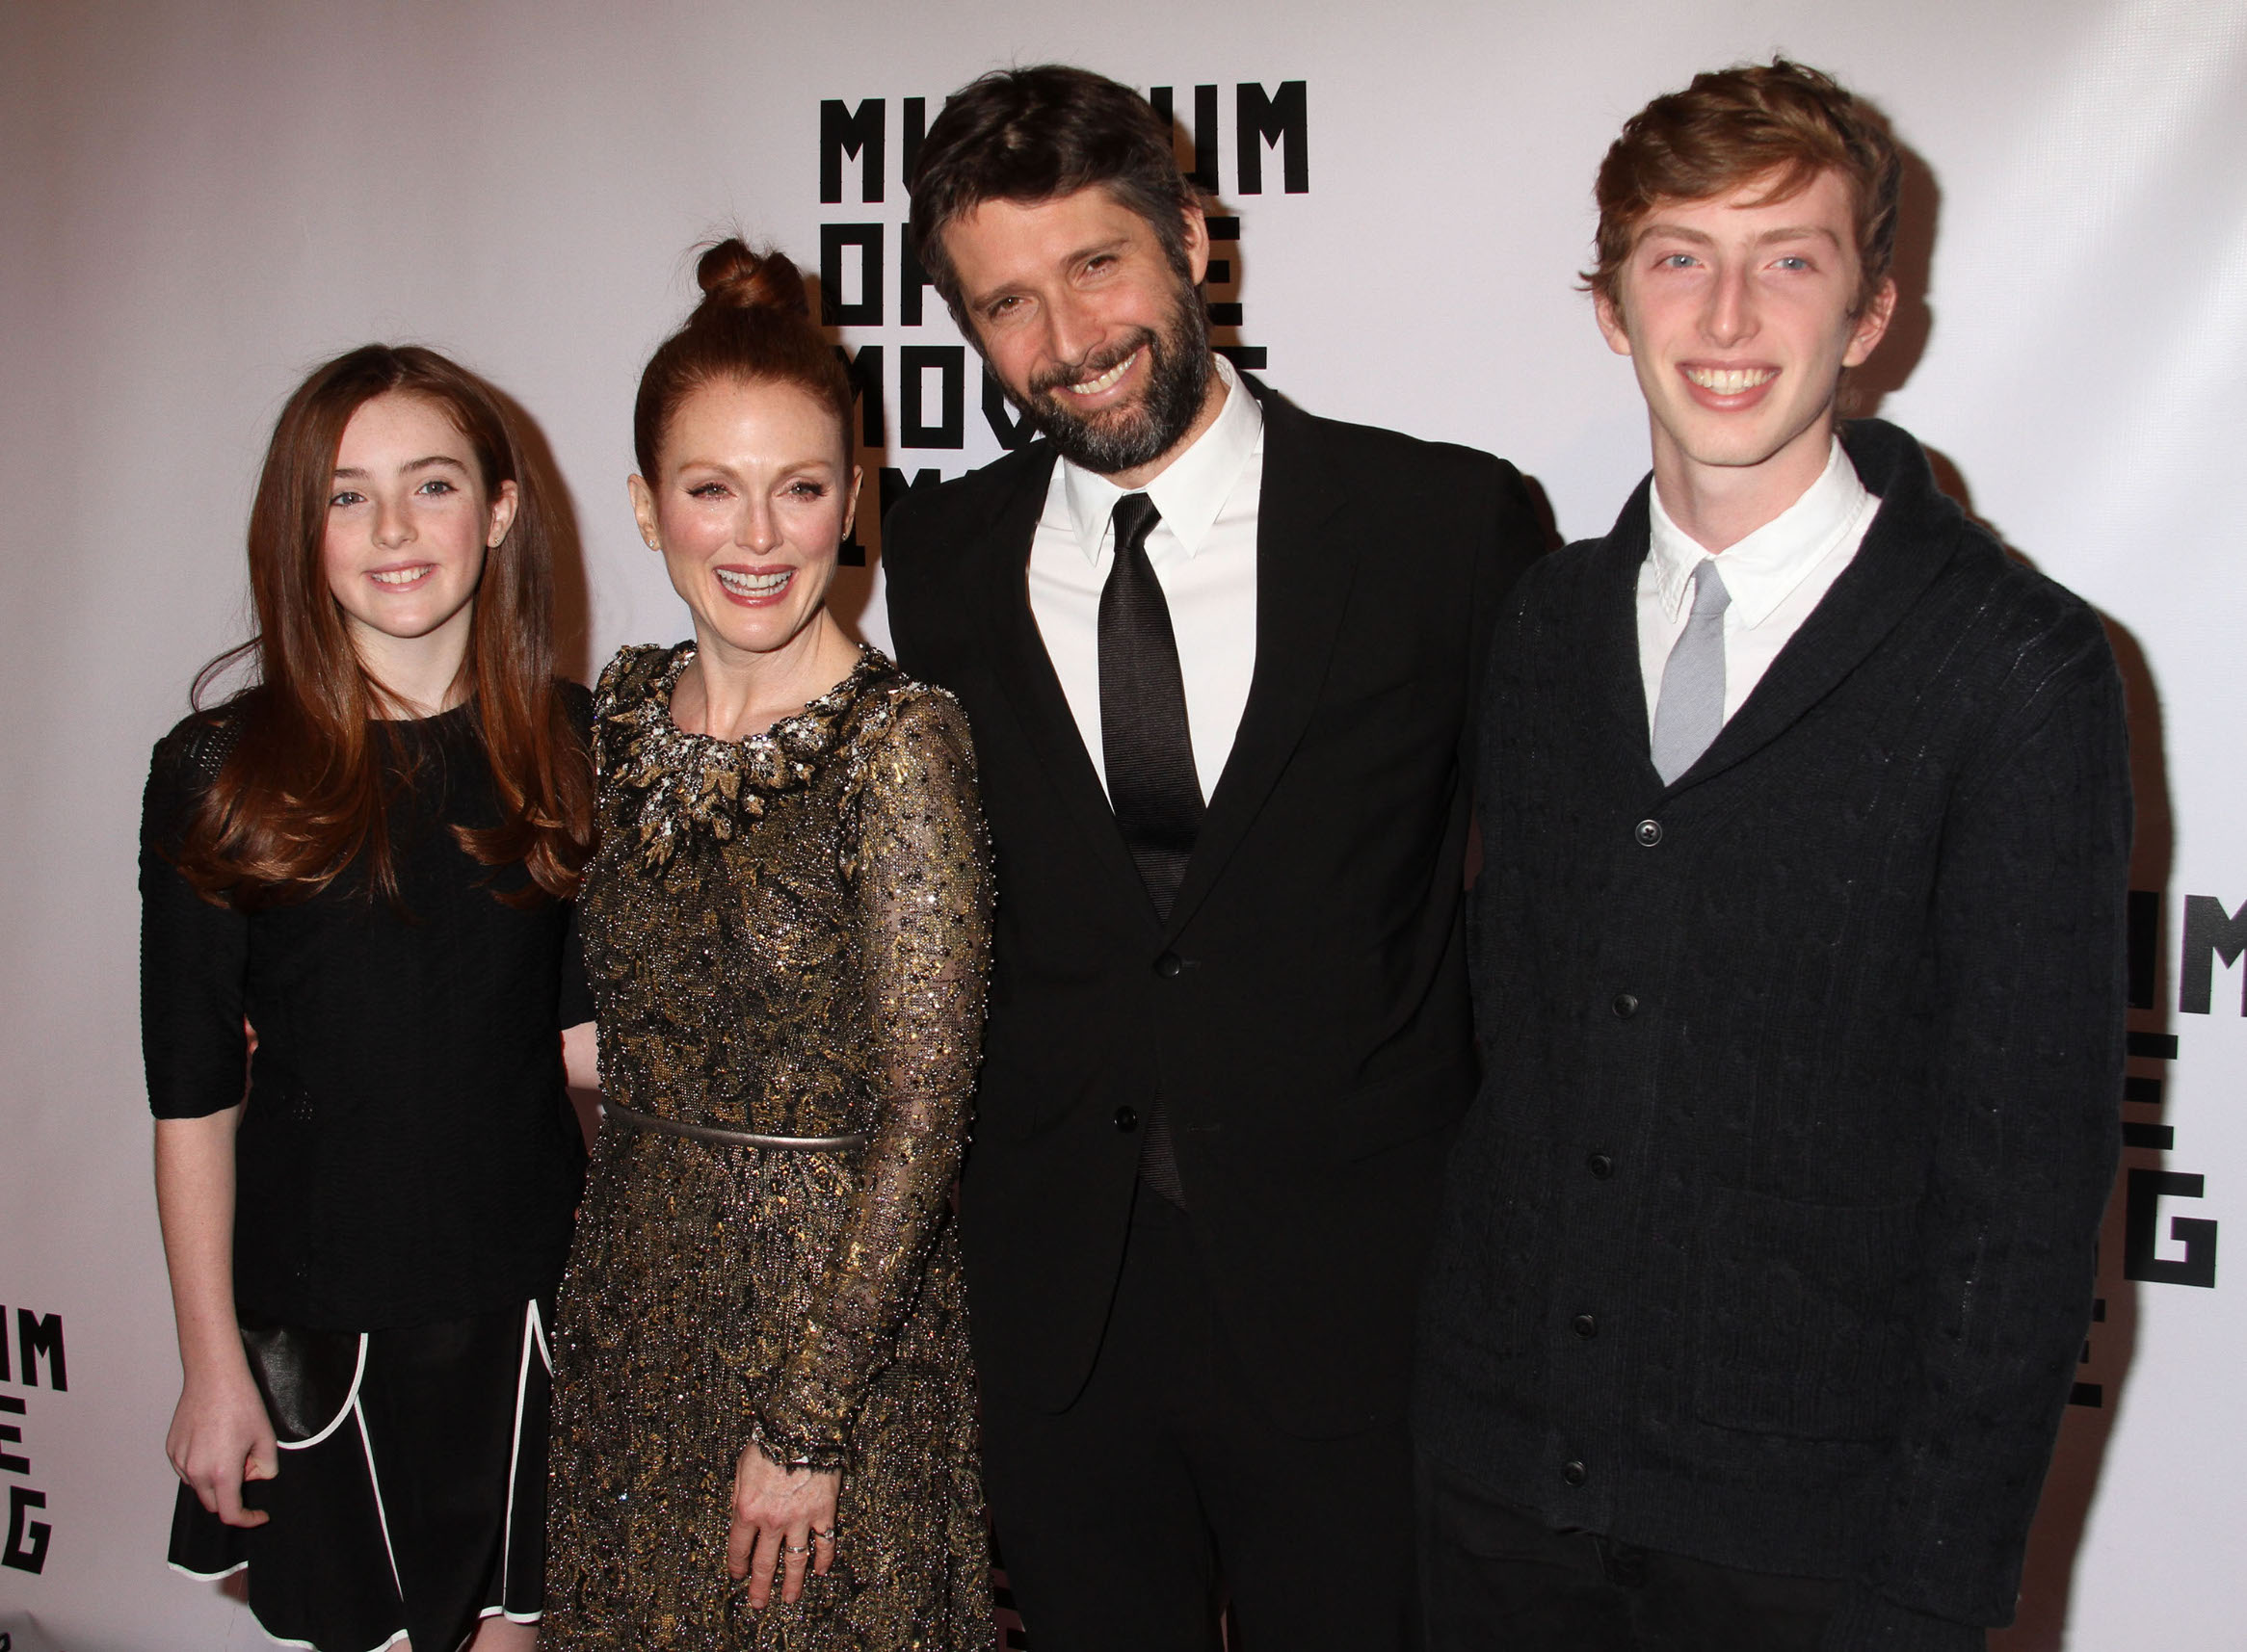 Jan. 20, 2015 - New York, New York, U.S. - LIV FREUNDLICH, JULIANNE MOORE, CALEB FREUNDLICH and BART FREUNDLICH attend the Museum of Moving Images Salute to Julianne Moore held at 583 Park at 63rd Street.,Image: 215809388, License: Rights-managed, Restrictions: , Model Release: no, Credit line: Nancy Kaszerman / Zuma Press / Profimedia